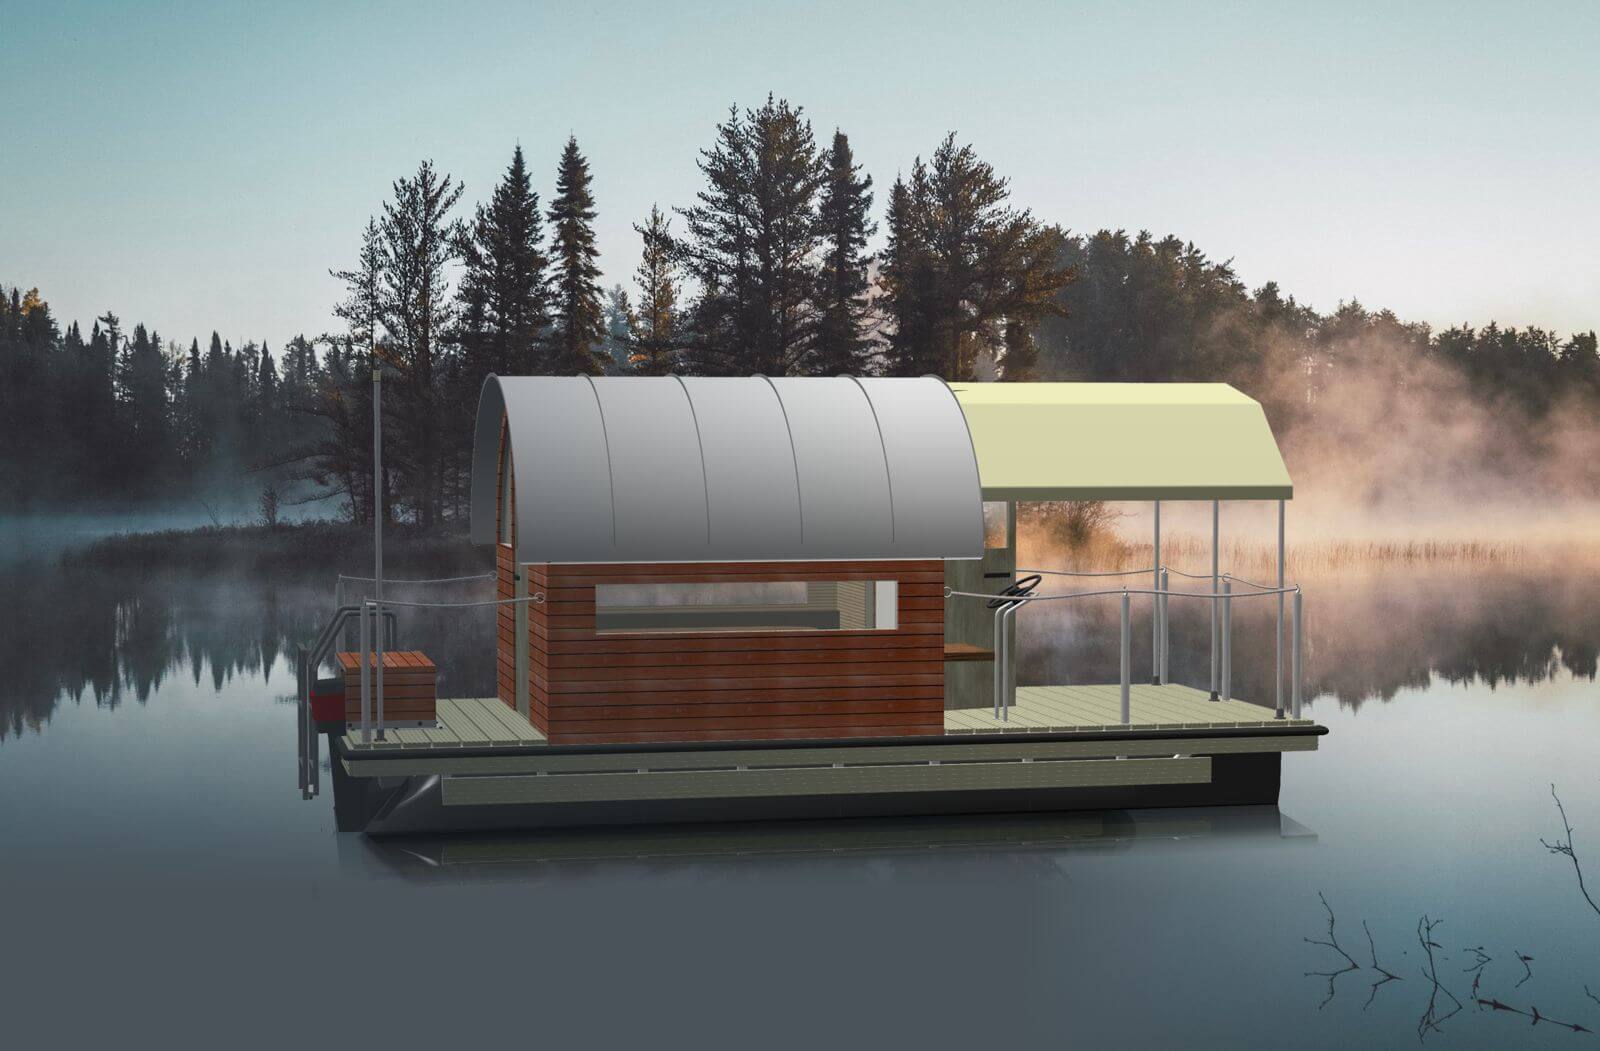 What are some major pros and cons of living on a Pontoon houseboat? post thumbnail image